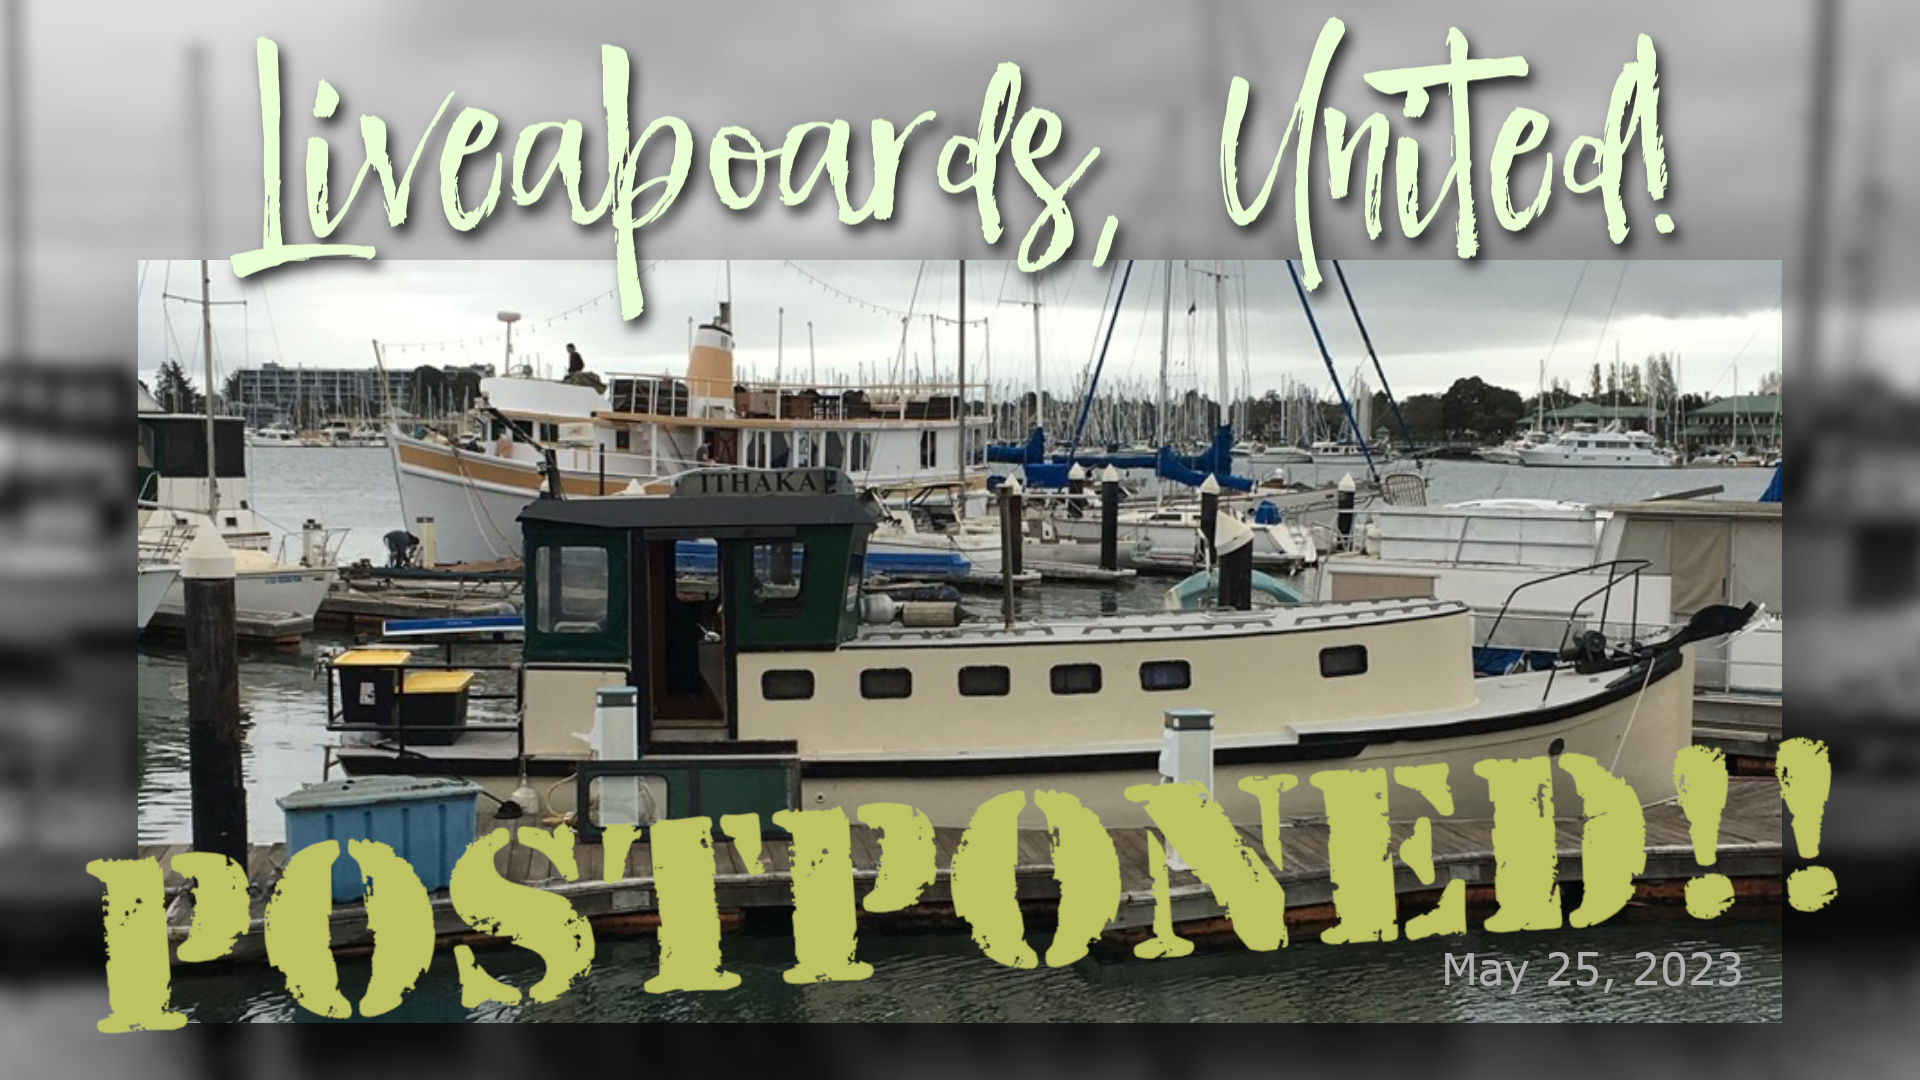 Postponed: Liveaboards, United! All-virtual Meeting on May 25, 2023 at 7:00 pm